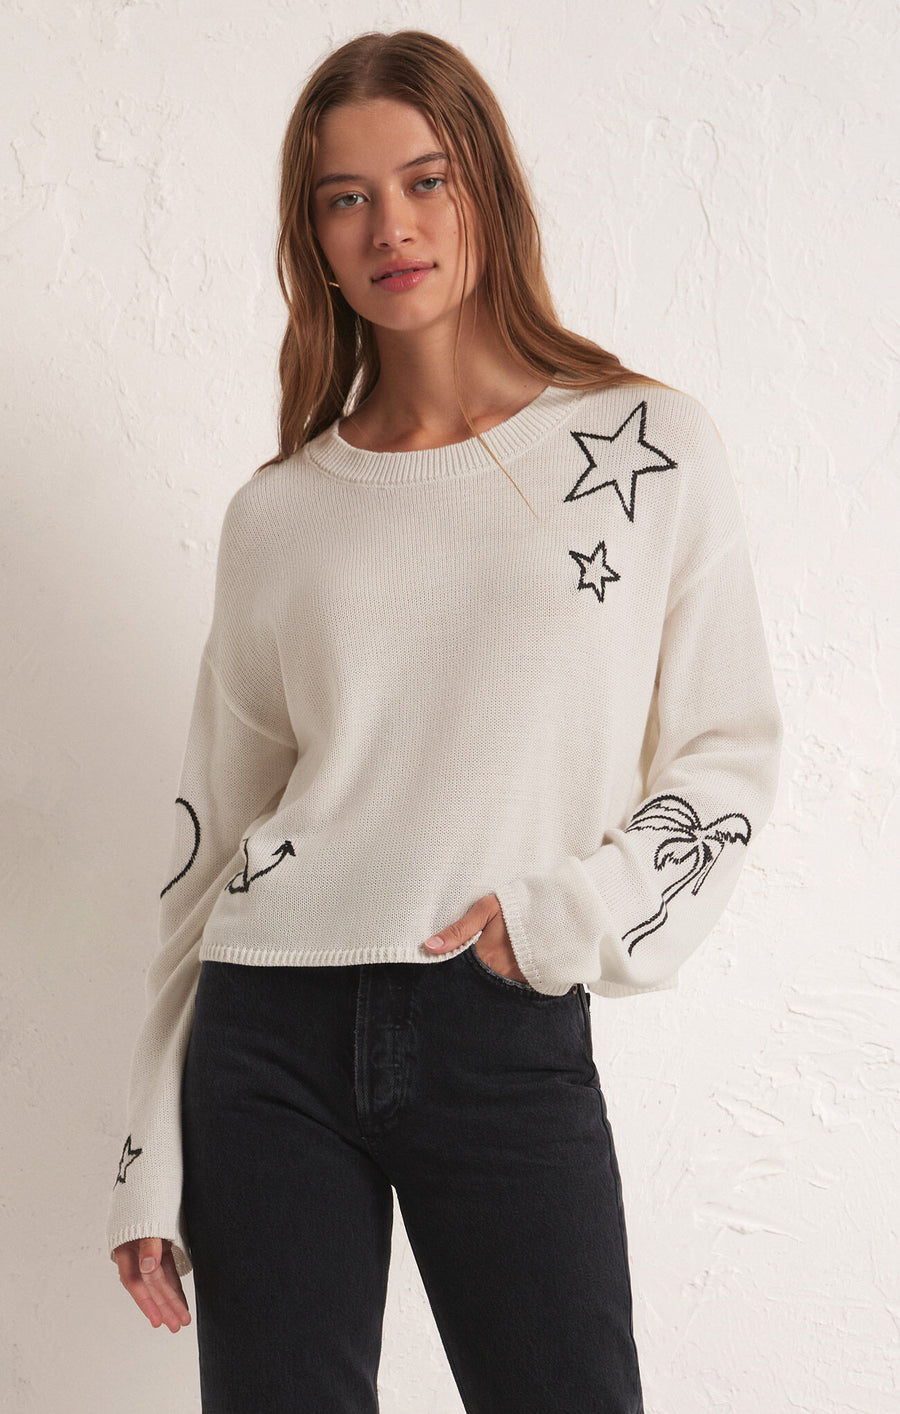 Sweater with intarsia designs in white.